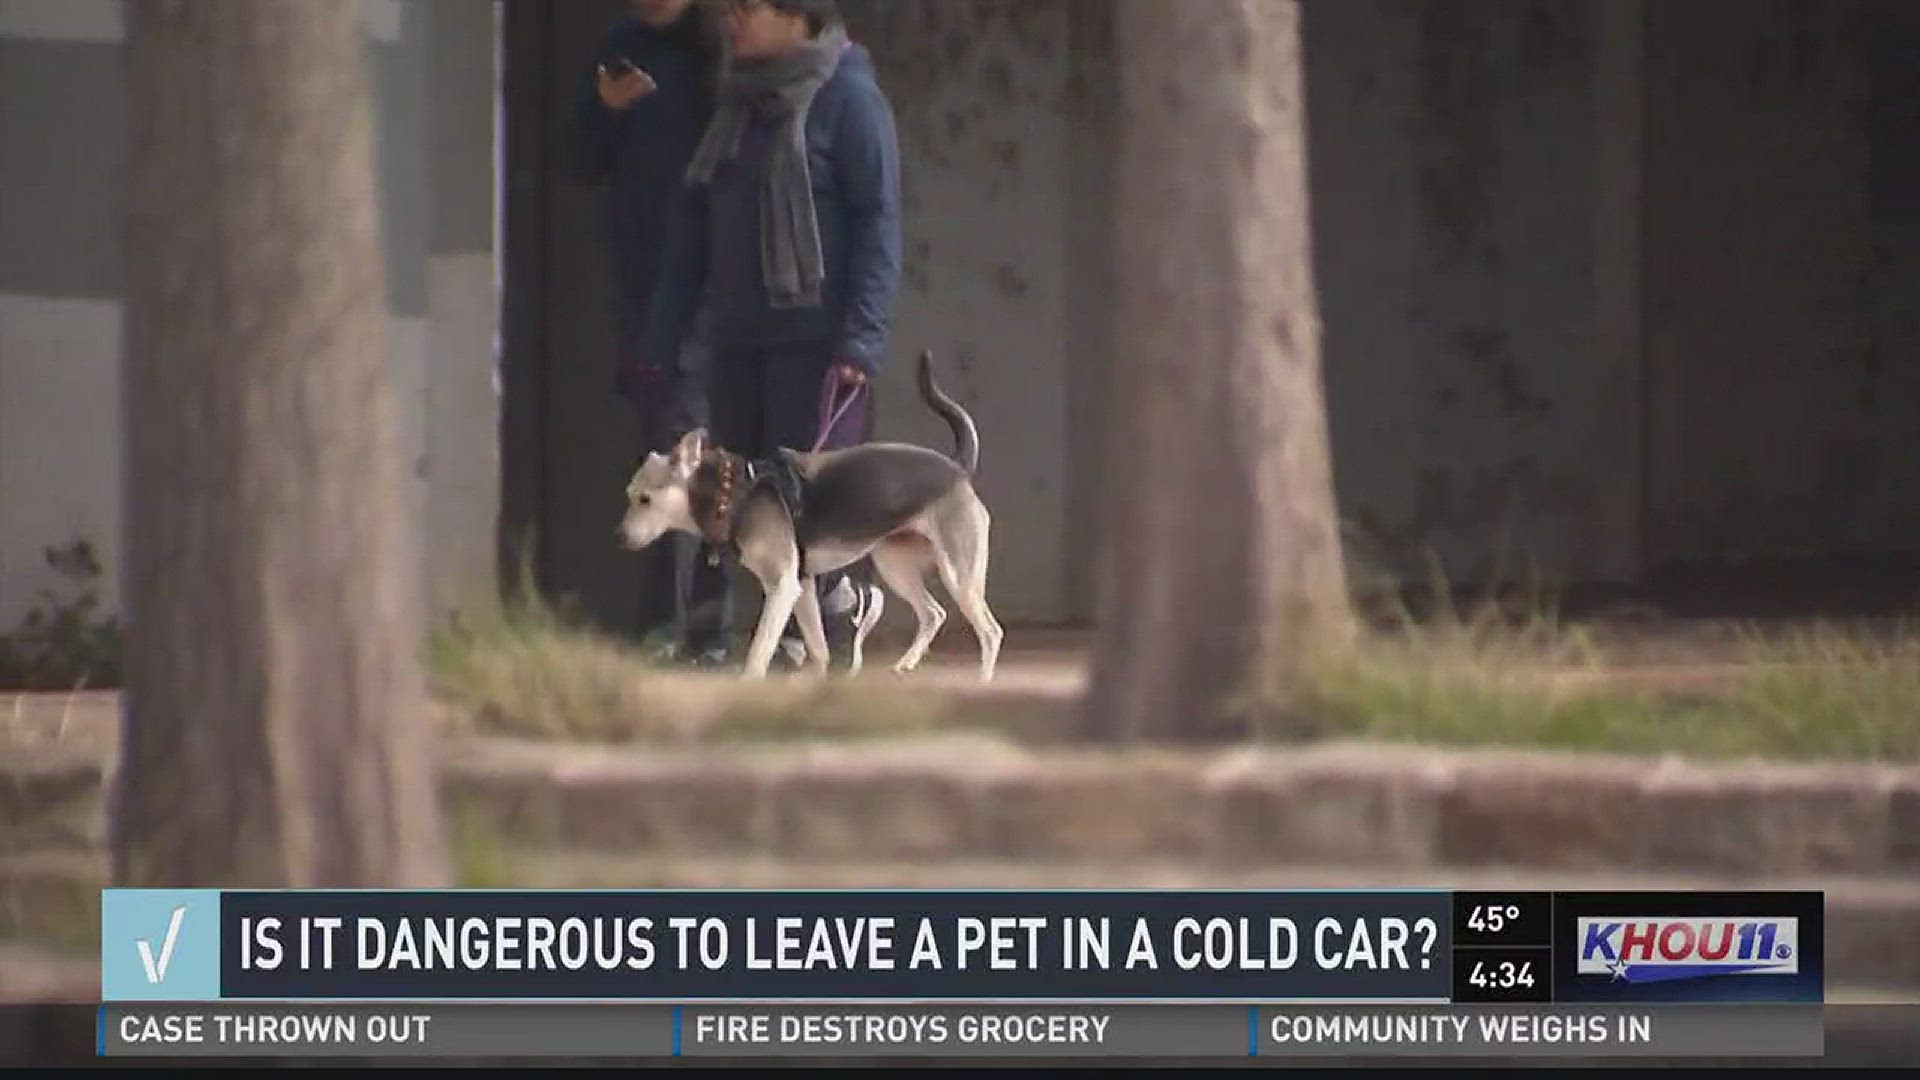 We know it's dangerous to leave our furry friends in cars when the temps are hot, but is it also dangerous to also leave them in these cold temps during the winter months?